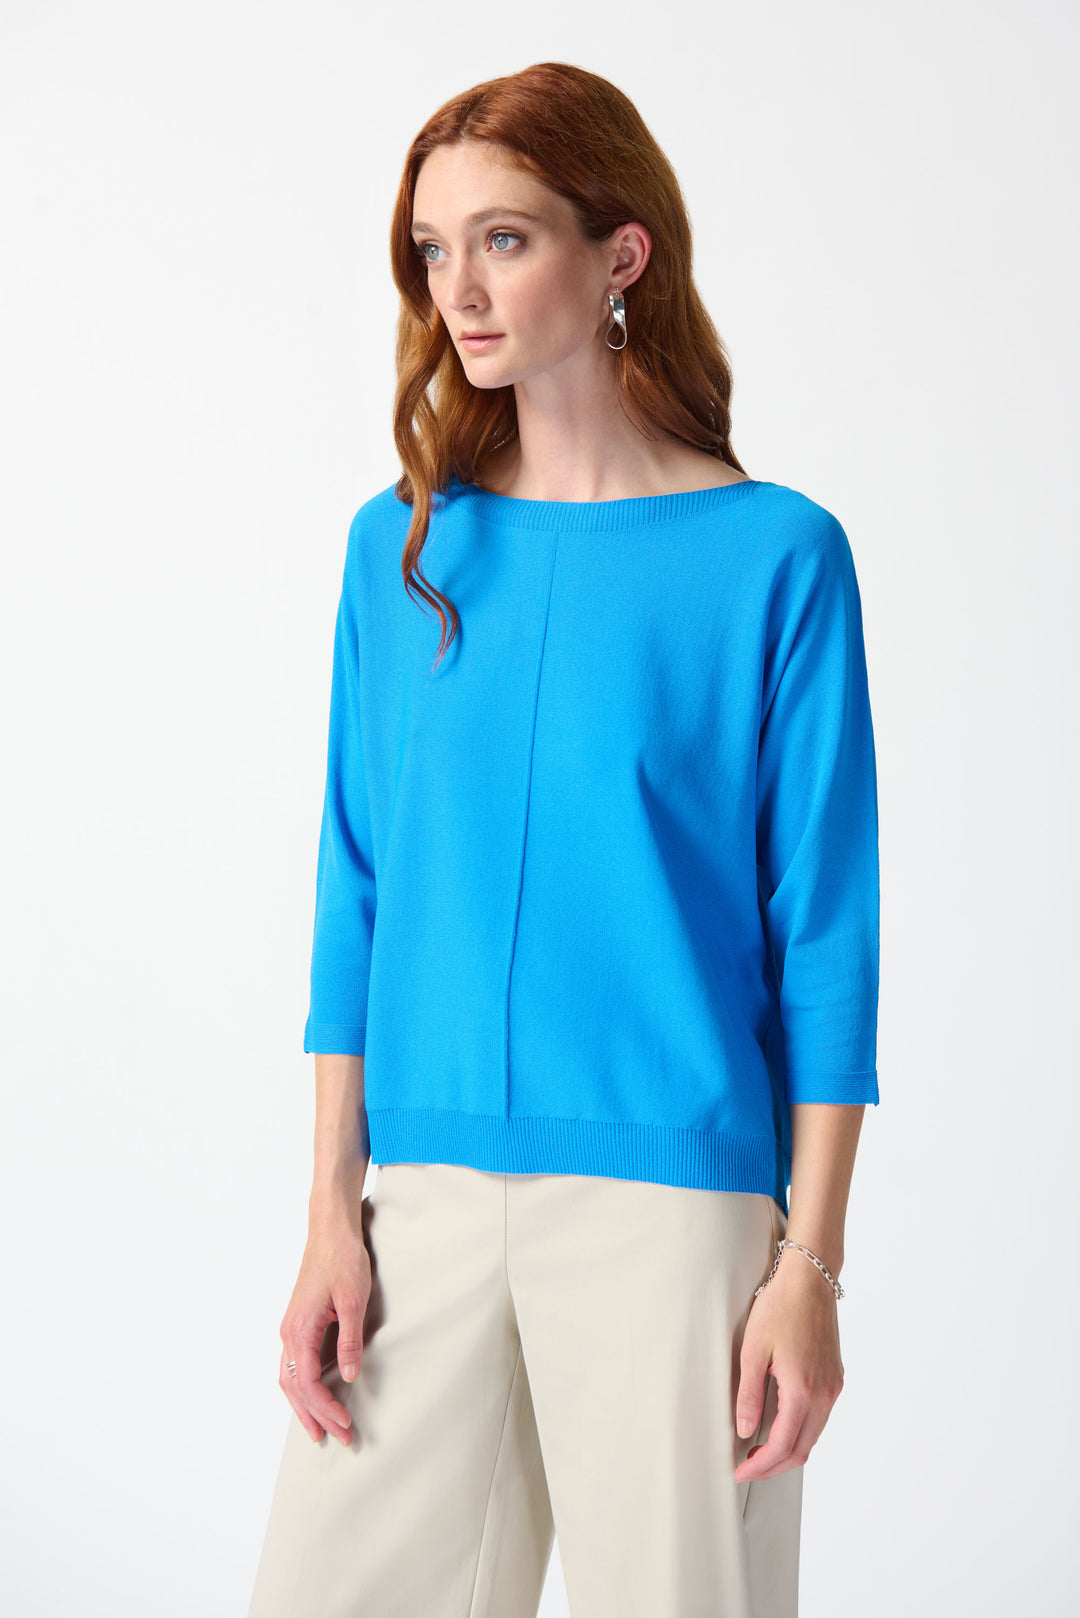 Designed with a relaxed fit and 3/4 length dolman sleeves, this polished piece will elevate any spring and summer outfit.